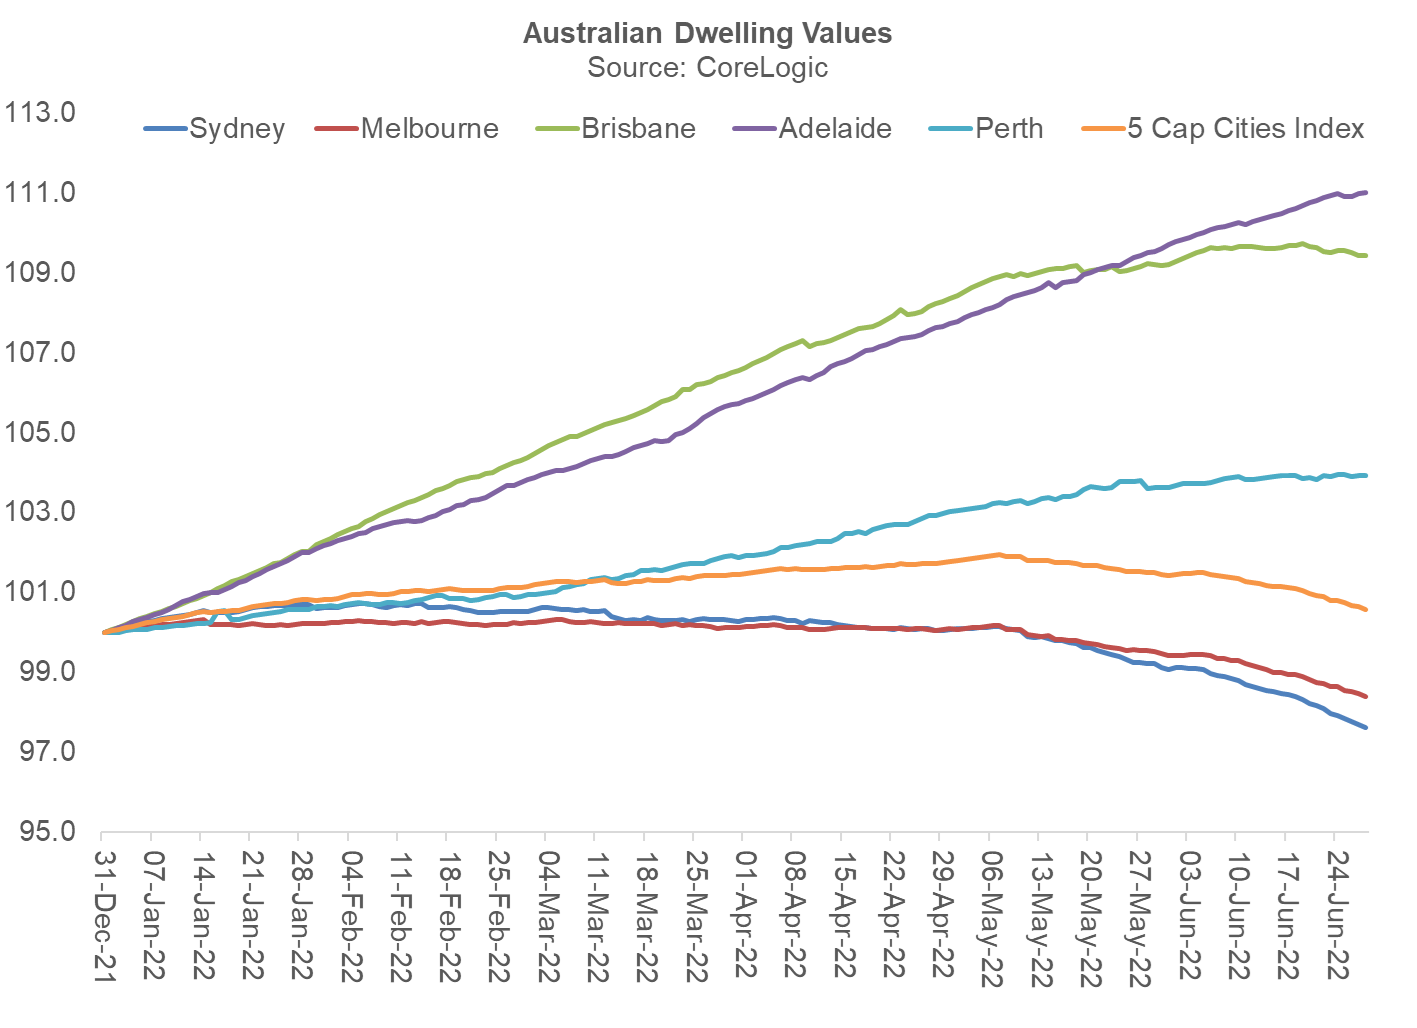 Aussie house prices are now declining quickly